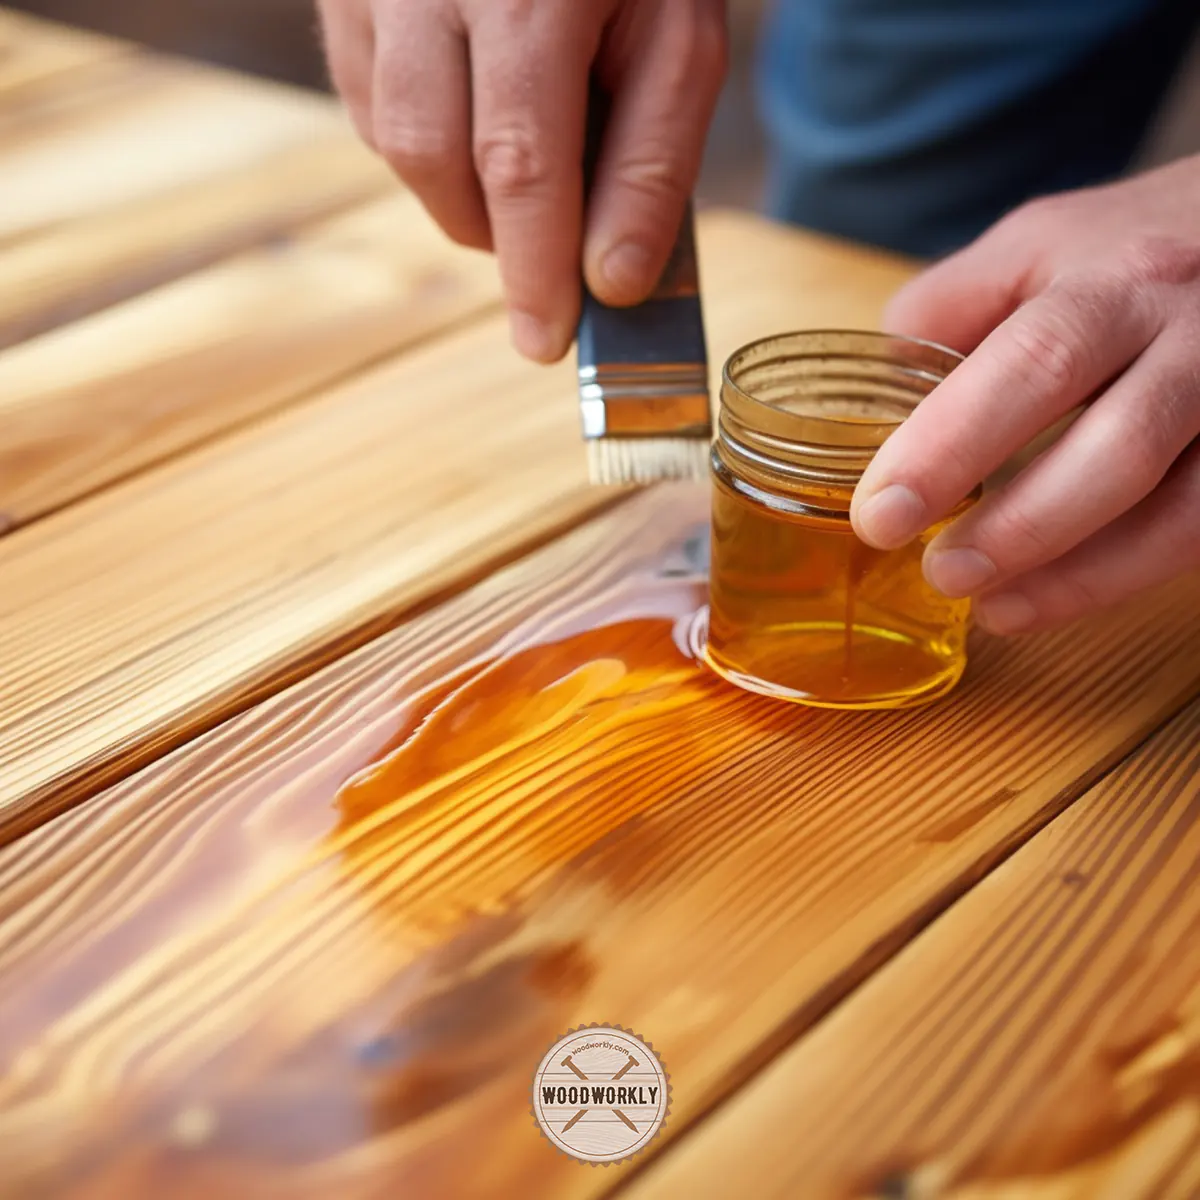 Applying linseed oil on wood surface to avoid wood cracking